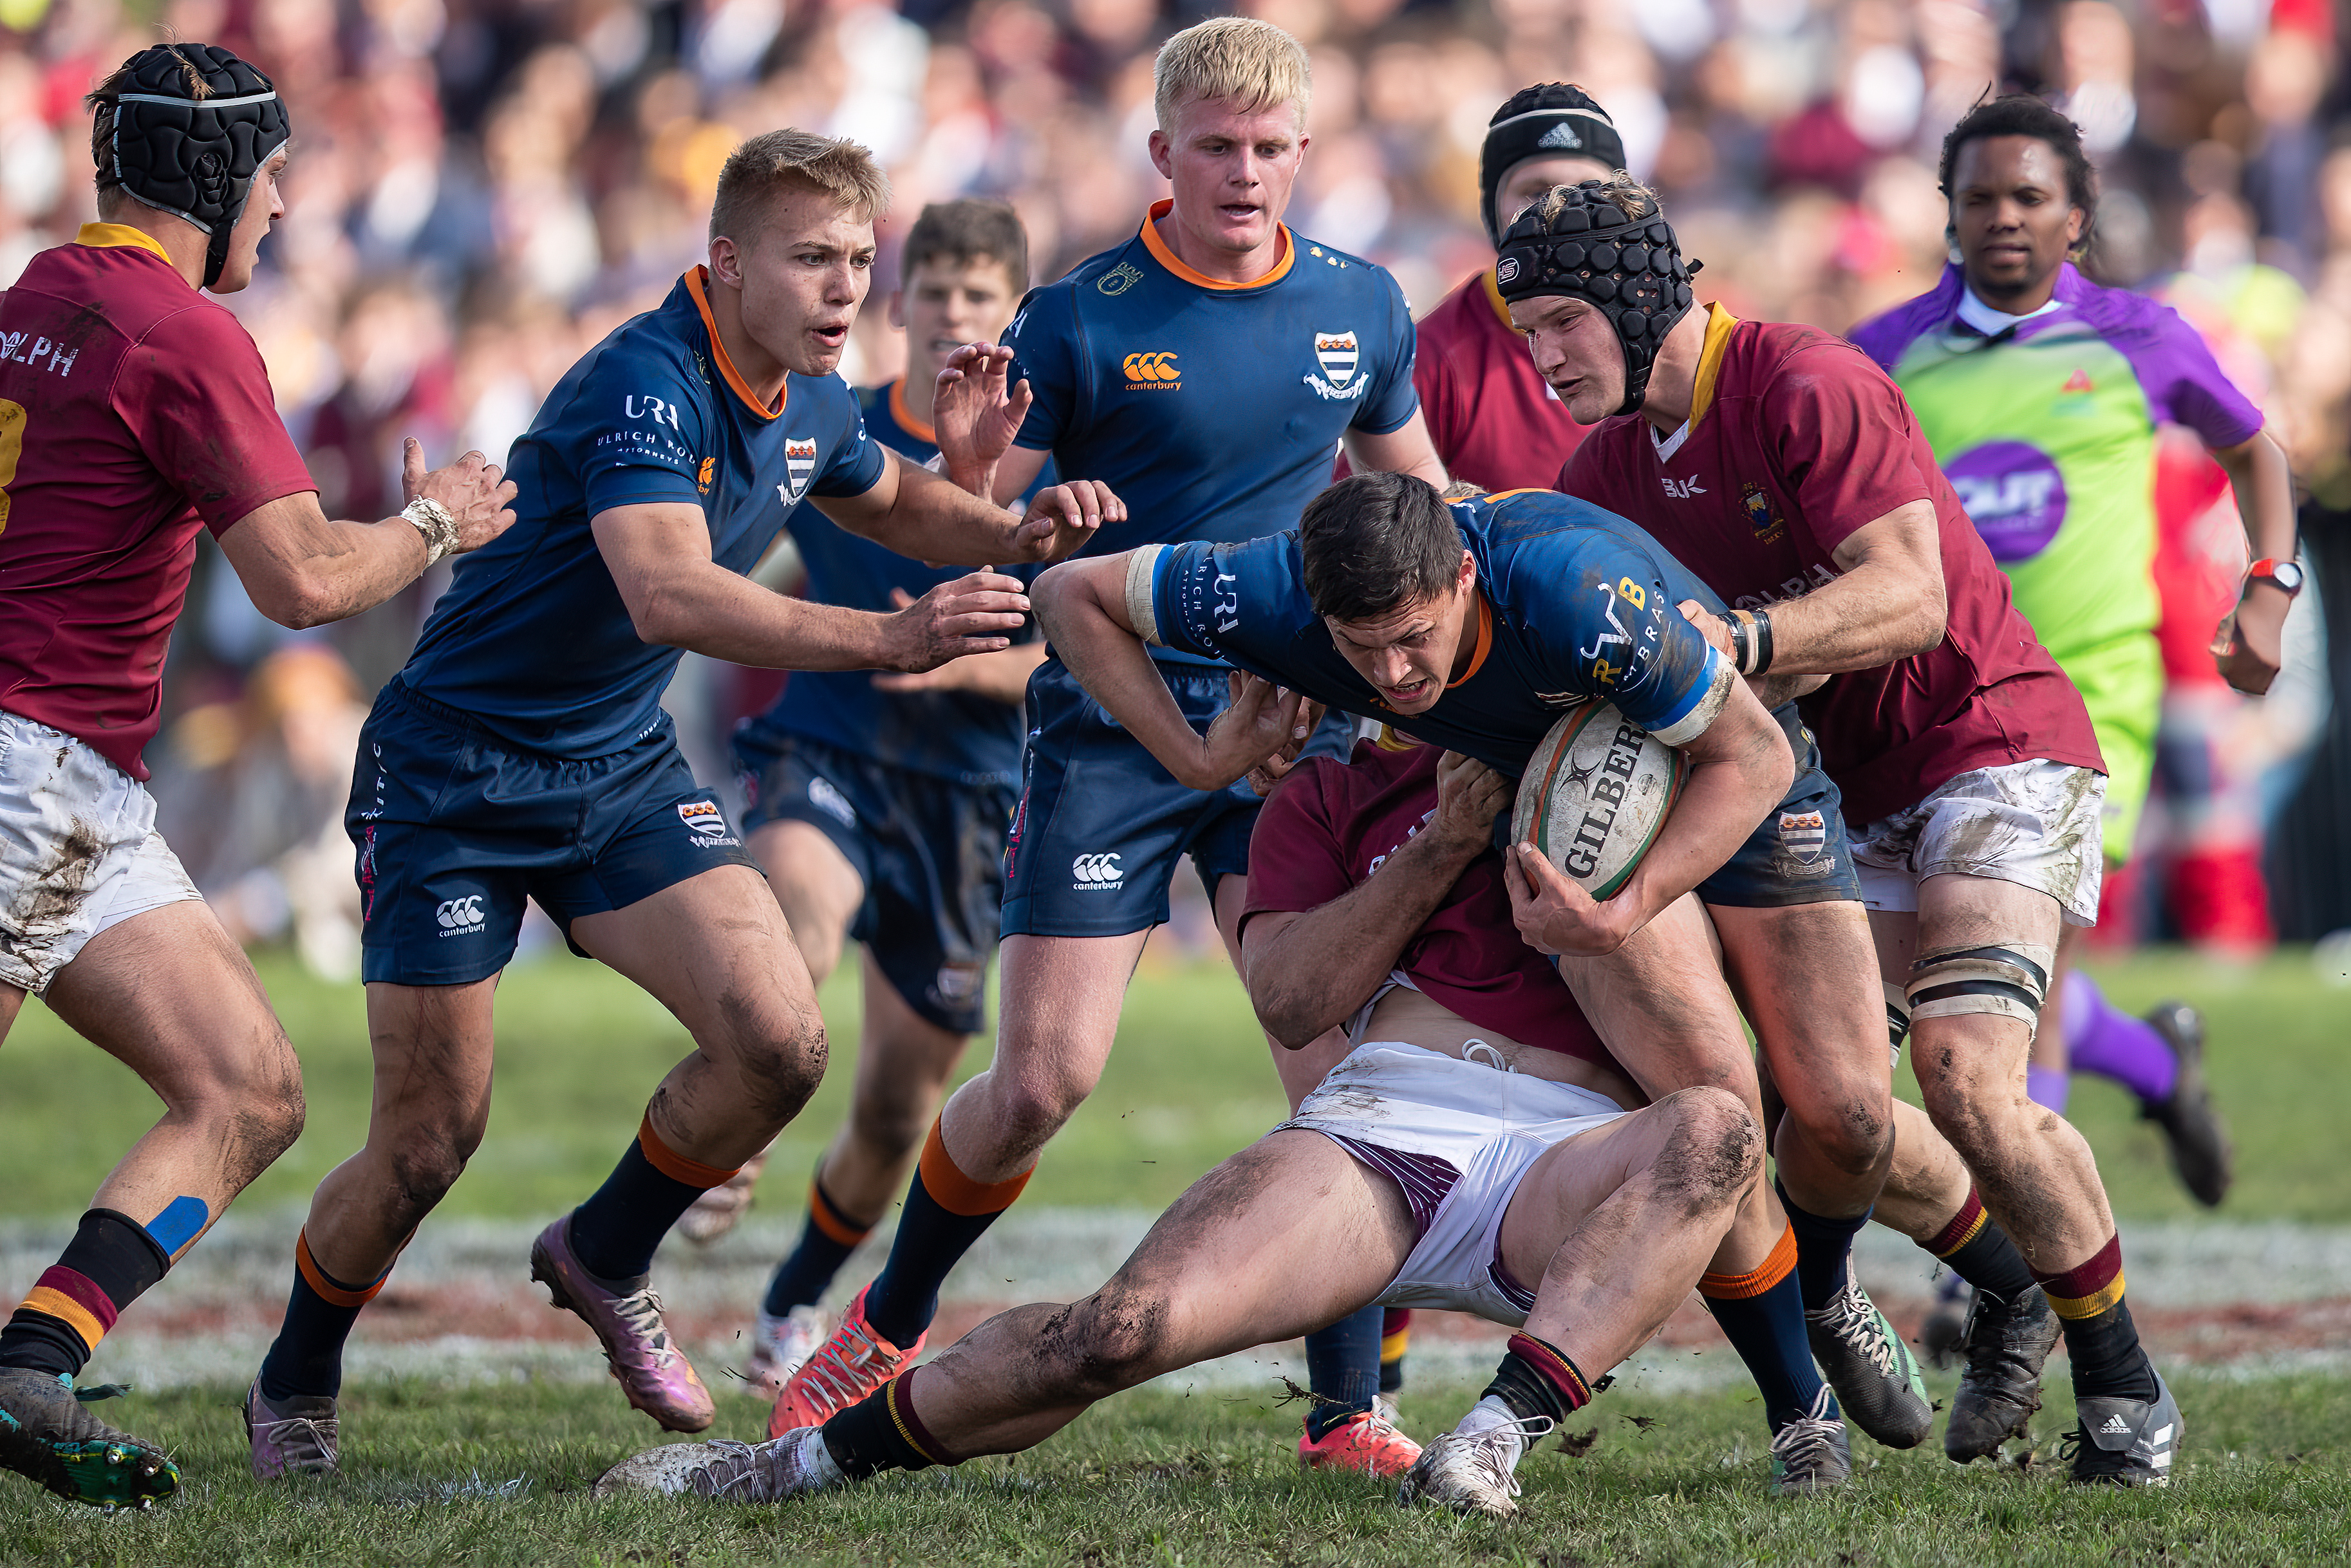 Match Report: Paul Roos 34 vs 19 Grey College (2022)